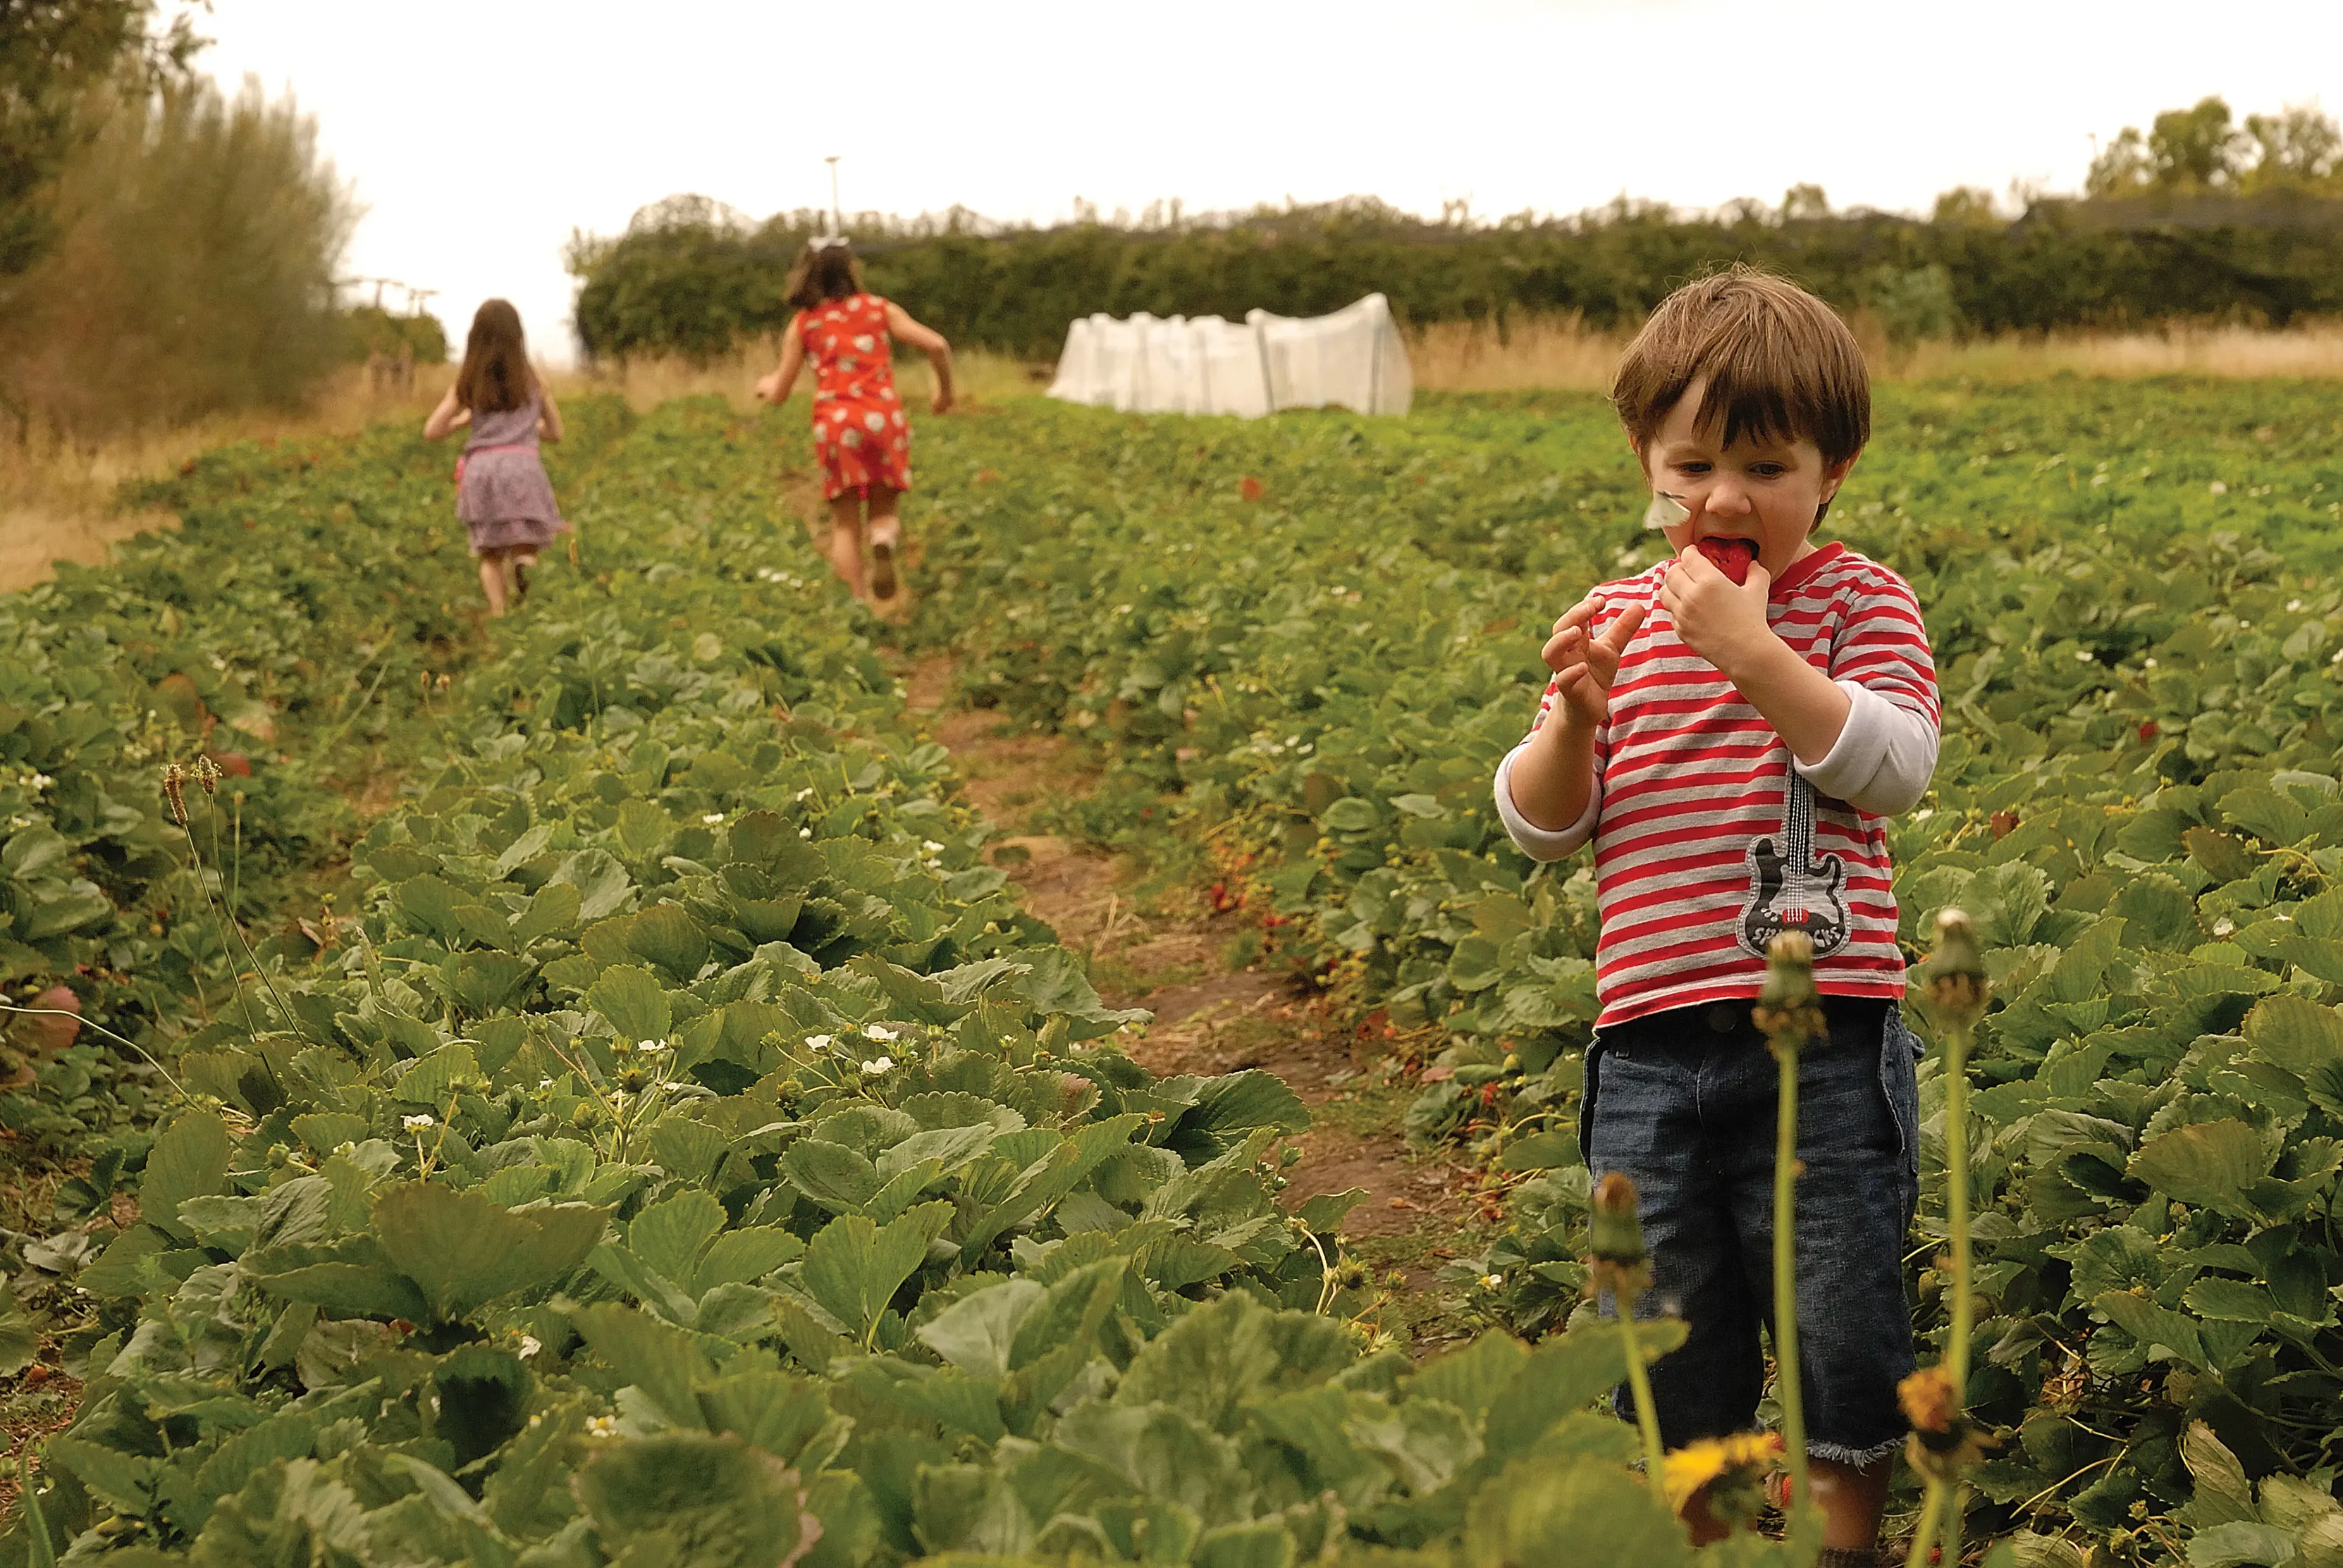 A small boy eats freshly picked fruit in the foreground, two young girls skip amongst the plants in the background at Sorell Fruit Farm.